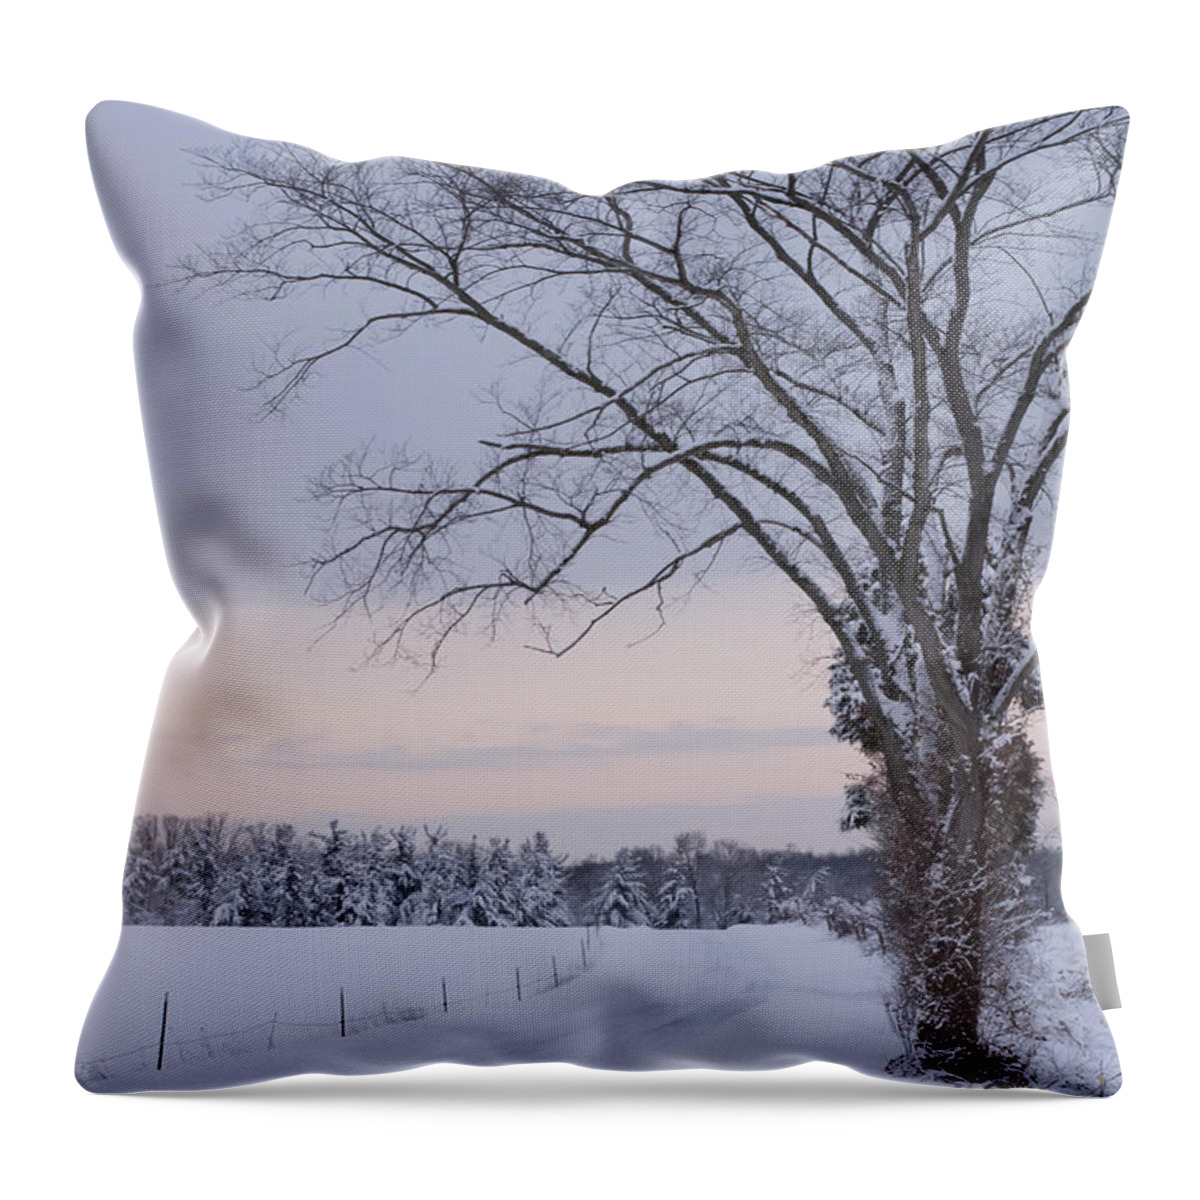 Season's Greetings Throw Pillow featuring the photograph Season's Greetings- Country Road by Holden The Moment